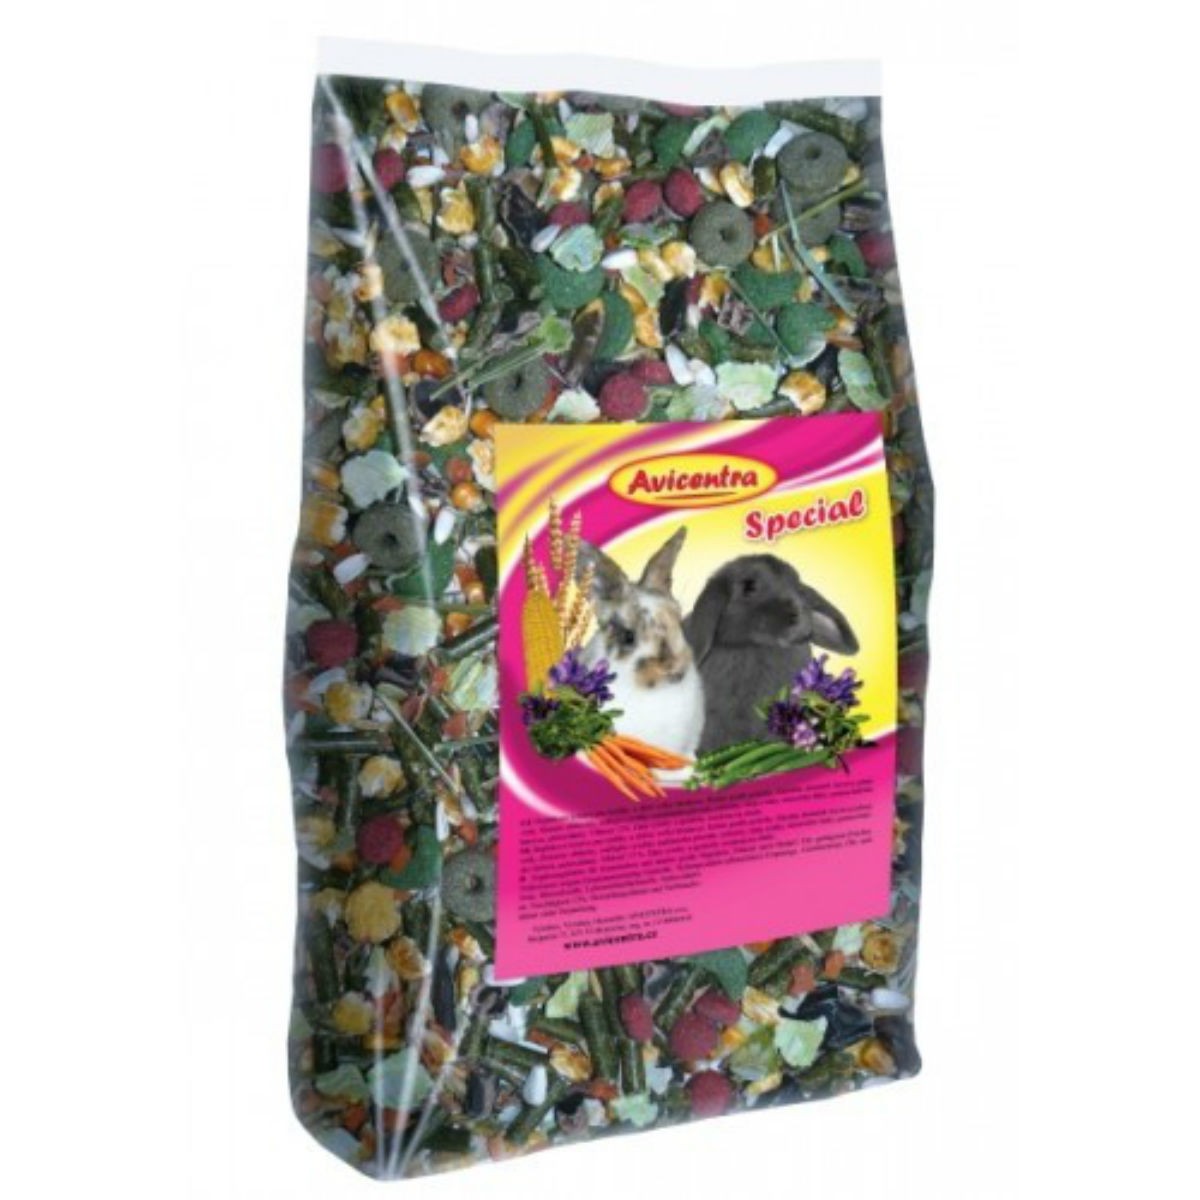 Avicentra Special for rabbits 500g